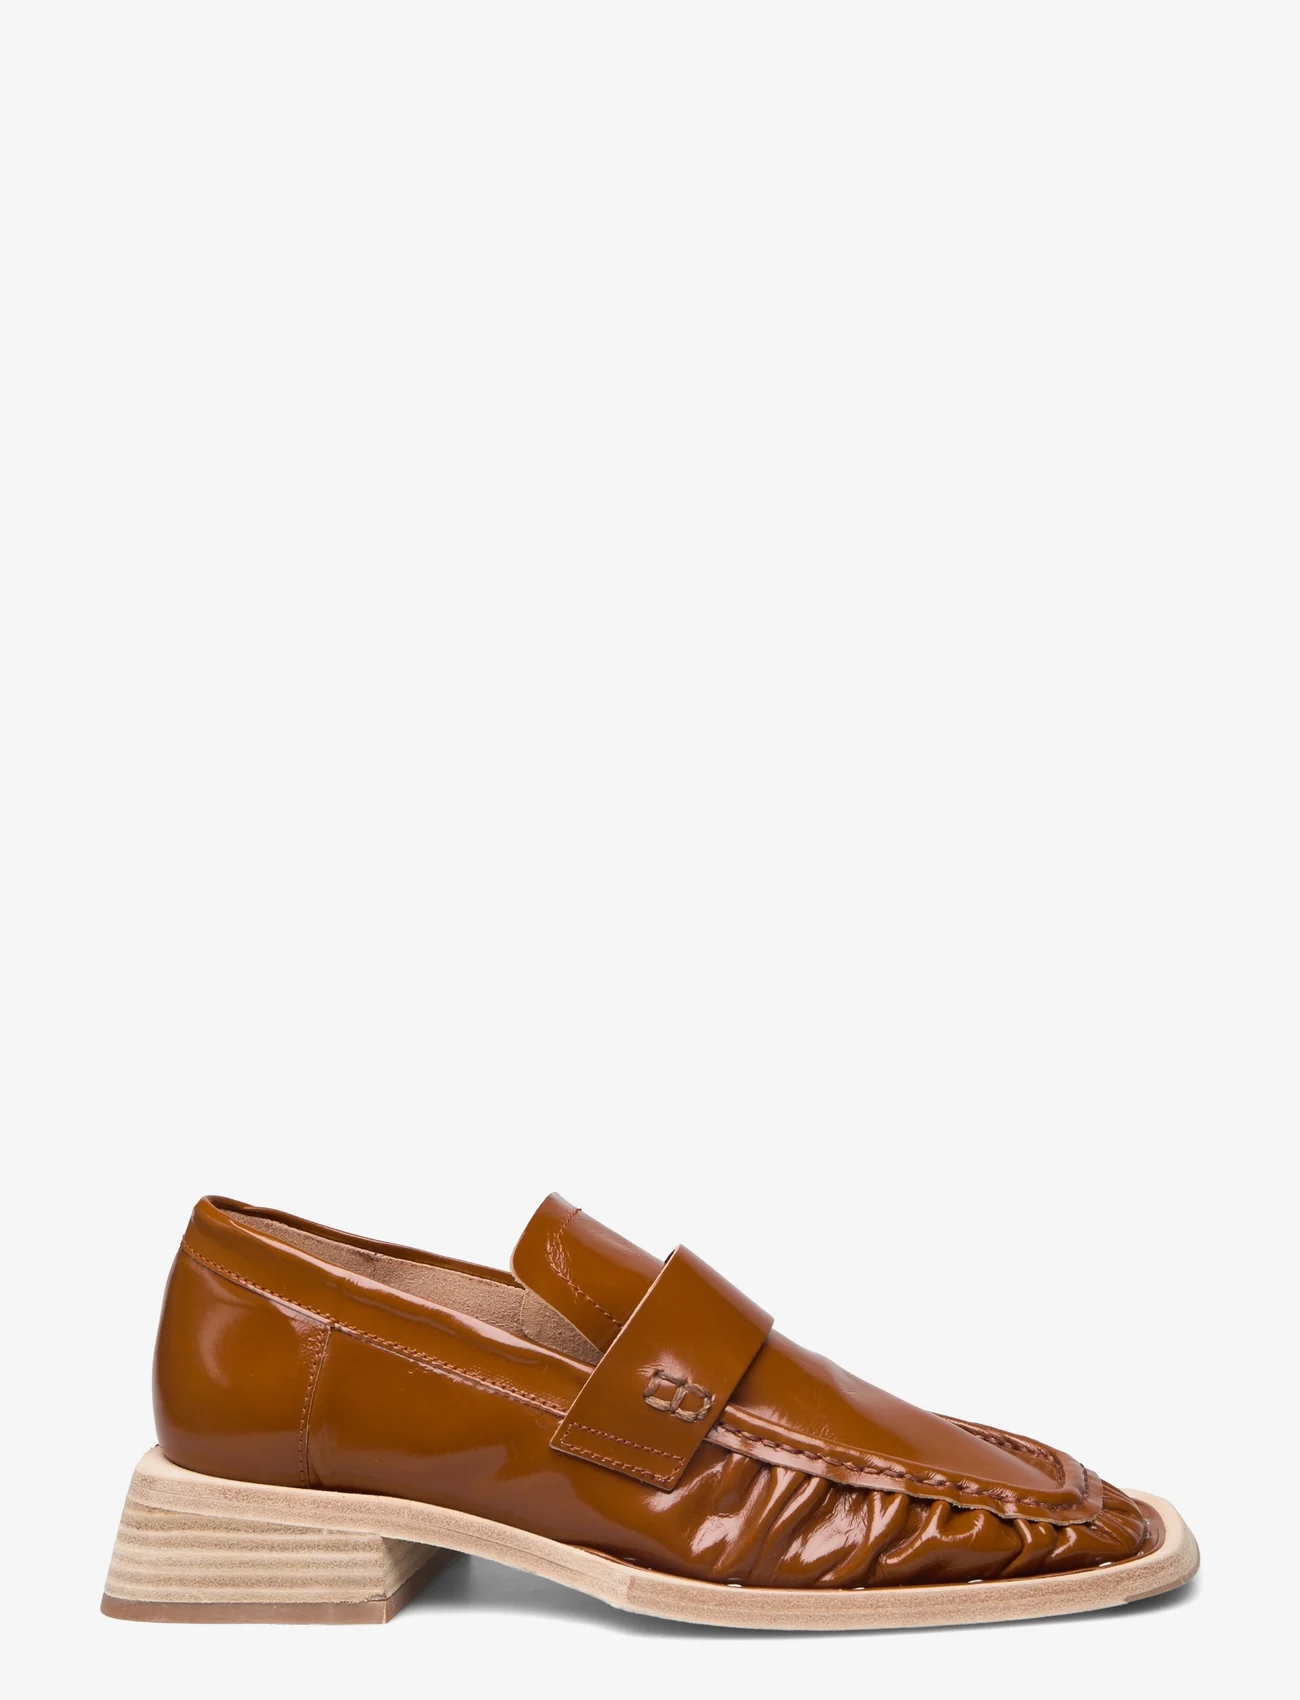 MIISTA - AIRI BROWN LOAFERS - birthday gifts - brown - 1